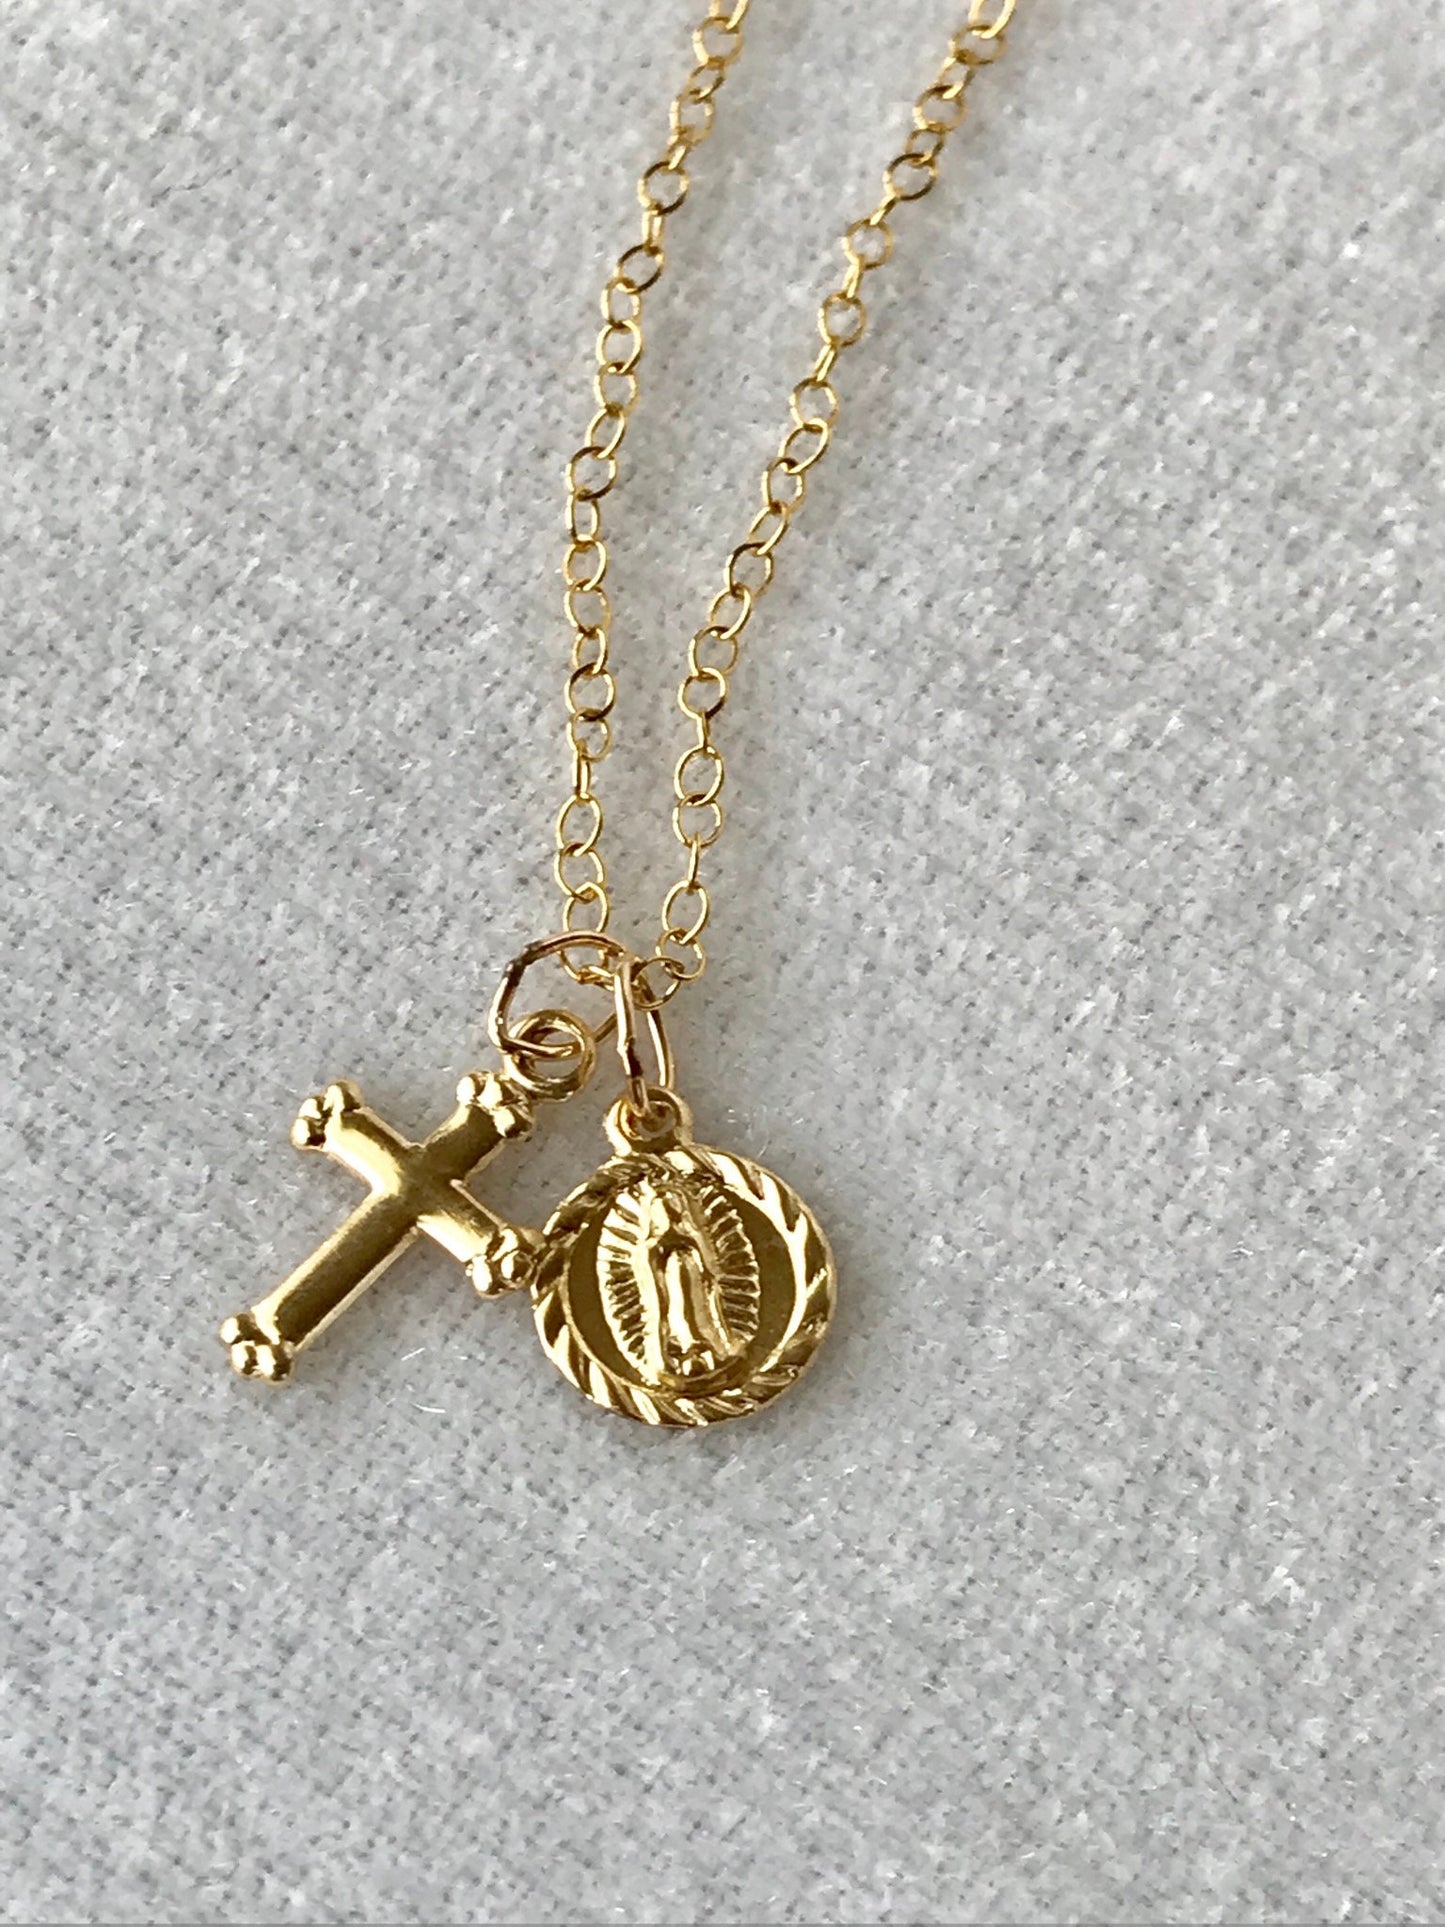 Baptism Christening Necklace,Gold and Crystal Cross Necklace,Confirmation Necklace,Gold First Holy Communion Crystal Necklace,Baby Necklace